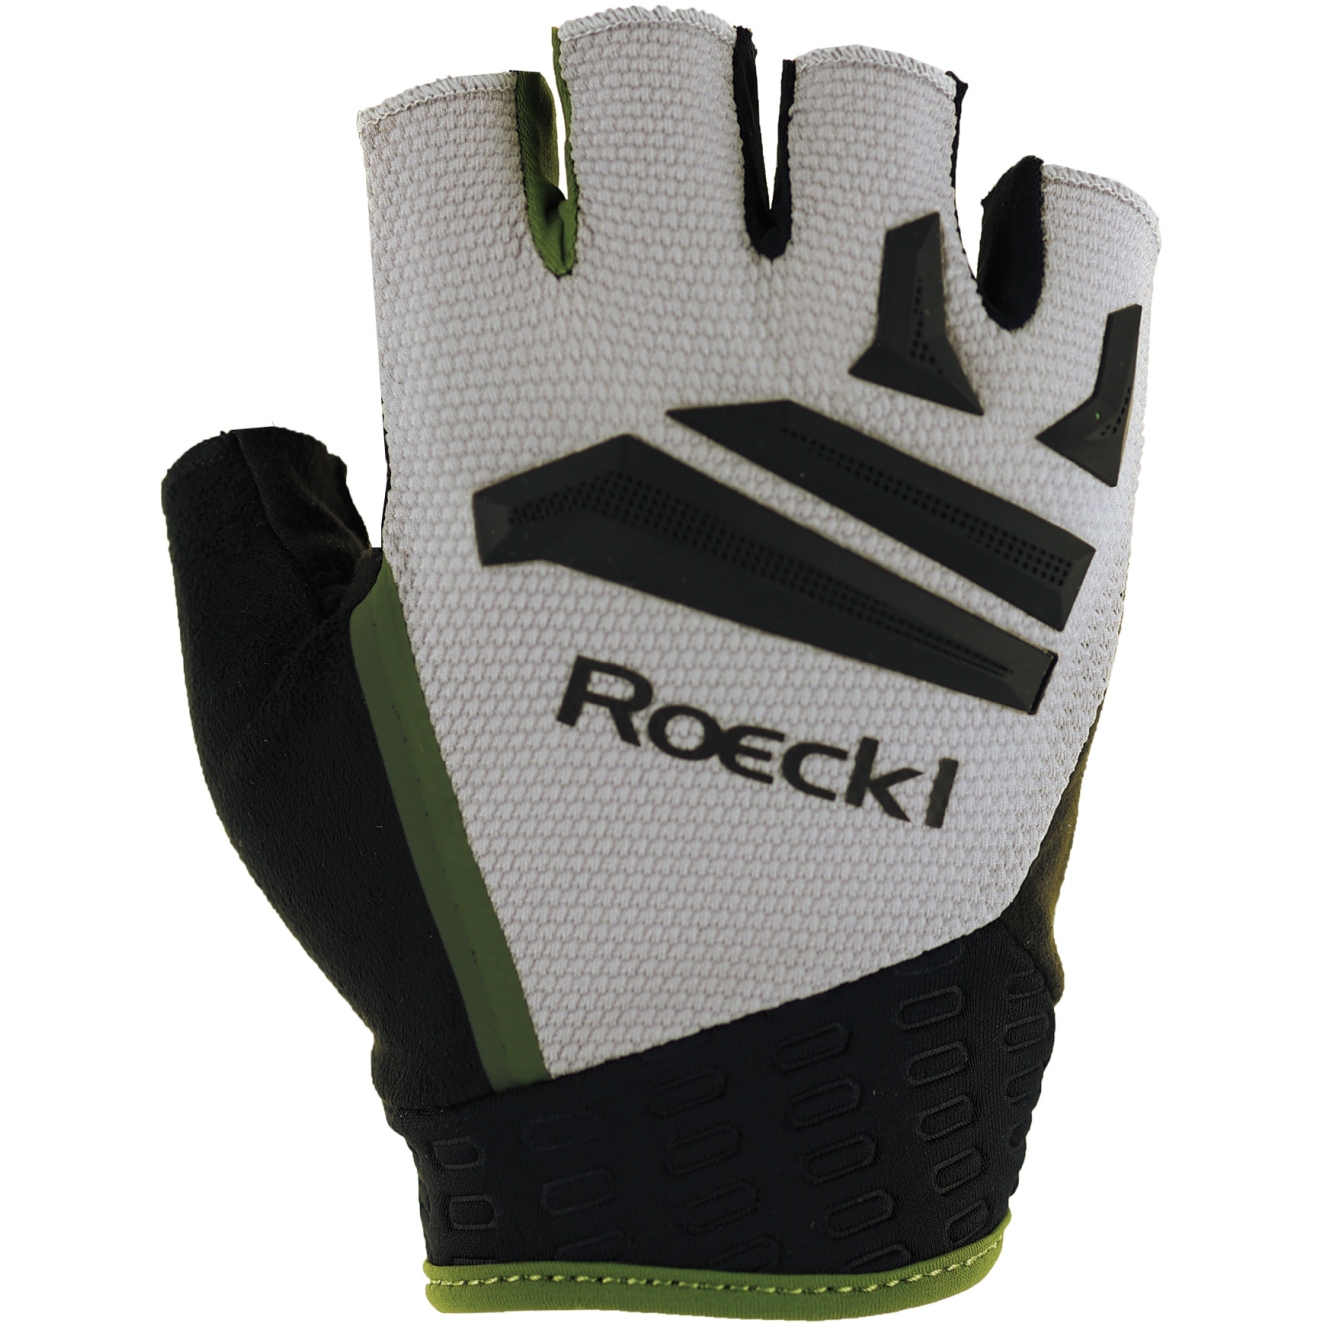 Picture of Roeckl Sports Iseler Cycling Gloves - harbor mist/pesto 8071